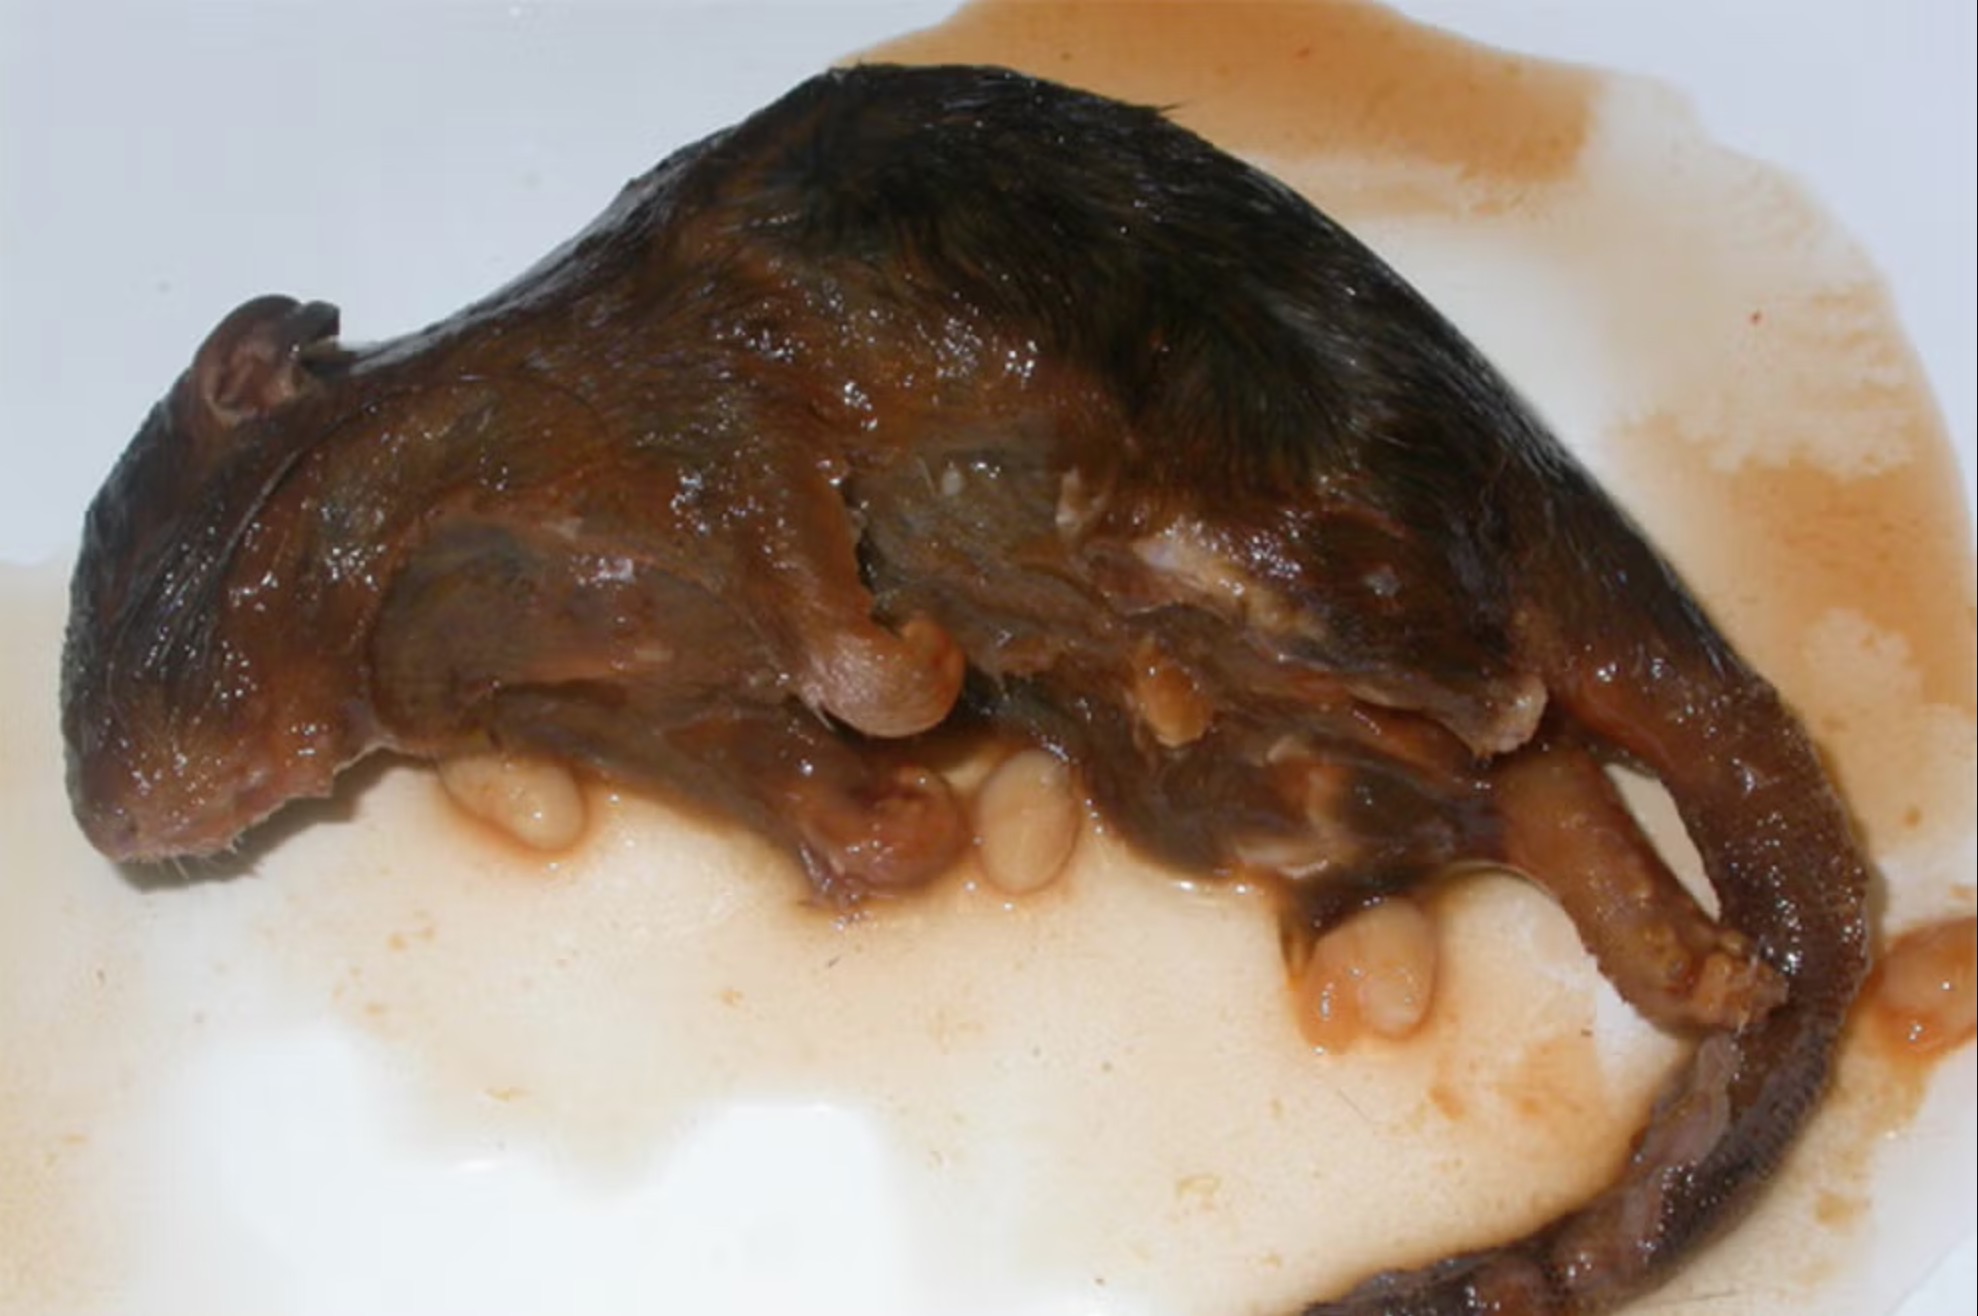 Dead Rat In Baked Beans - A Rat Is Sitting On A Plate With Fast Food Sauce On It.